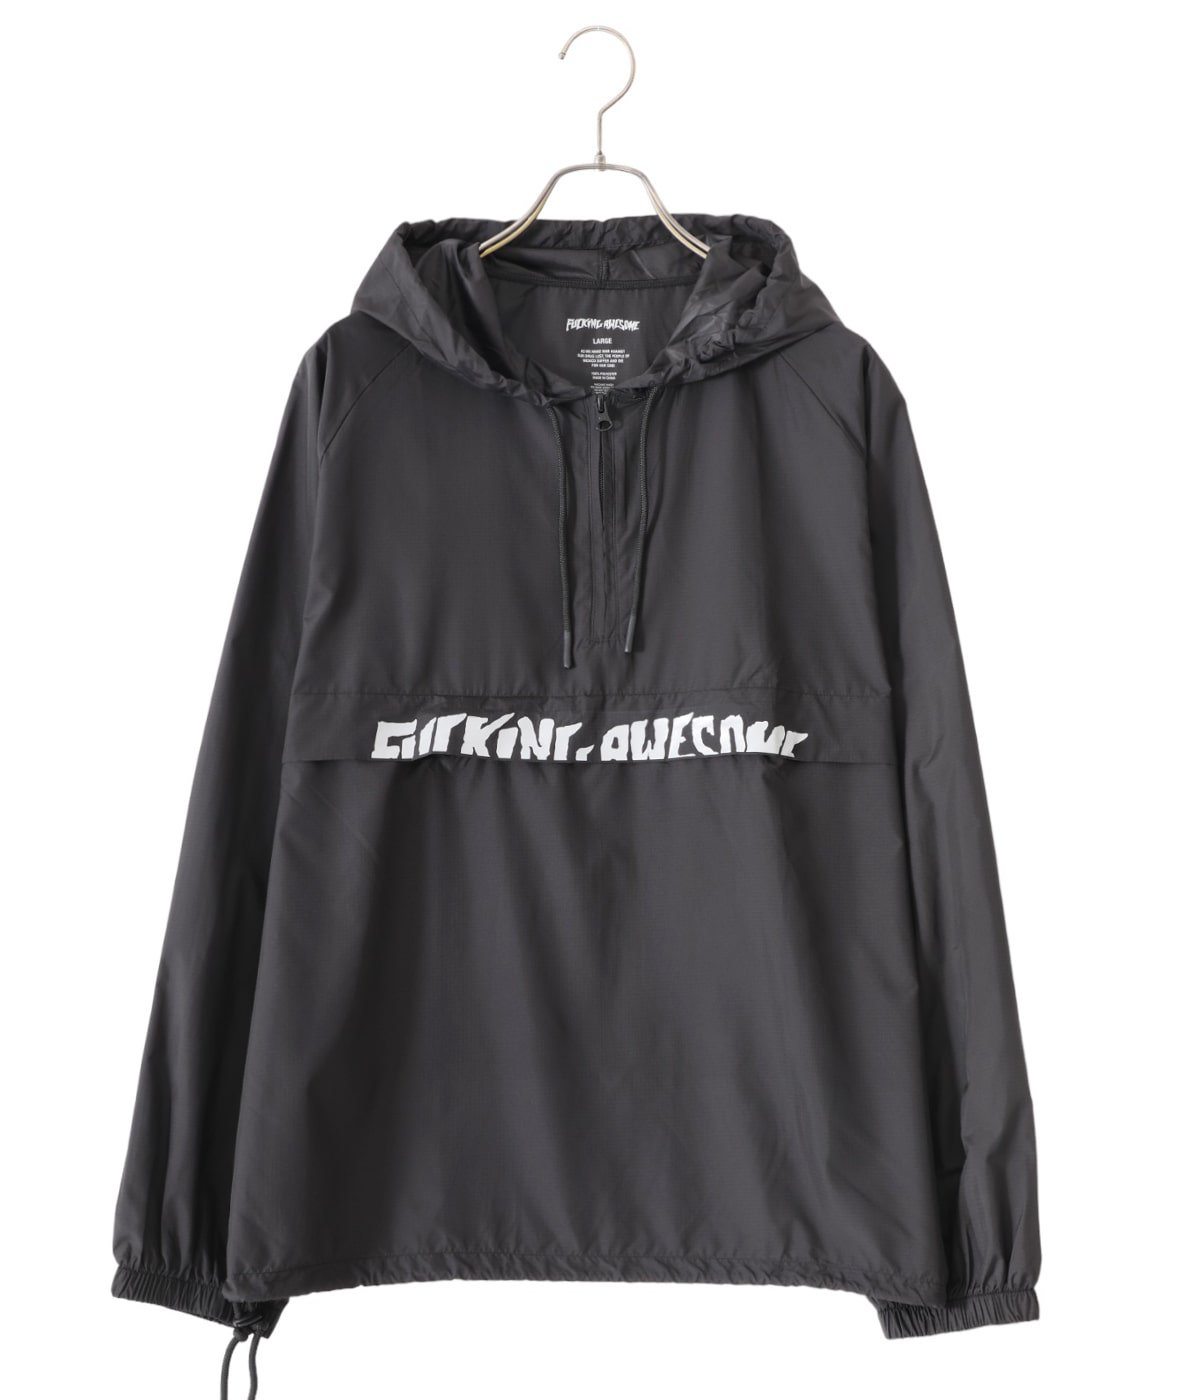 Cut Off Anorak Jacket | FUCKING AWESOME(ファッキンオーサム